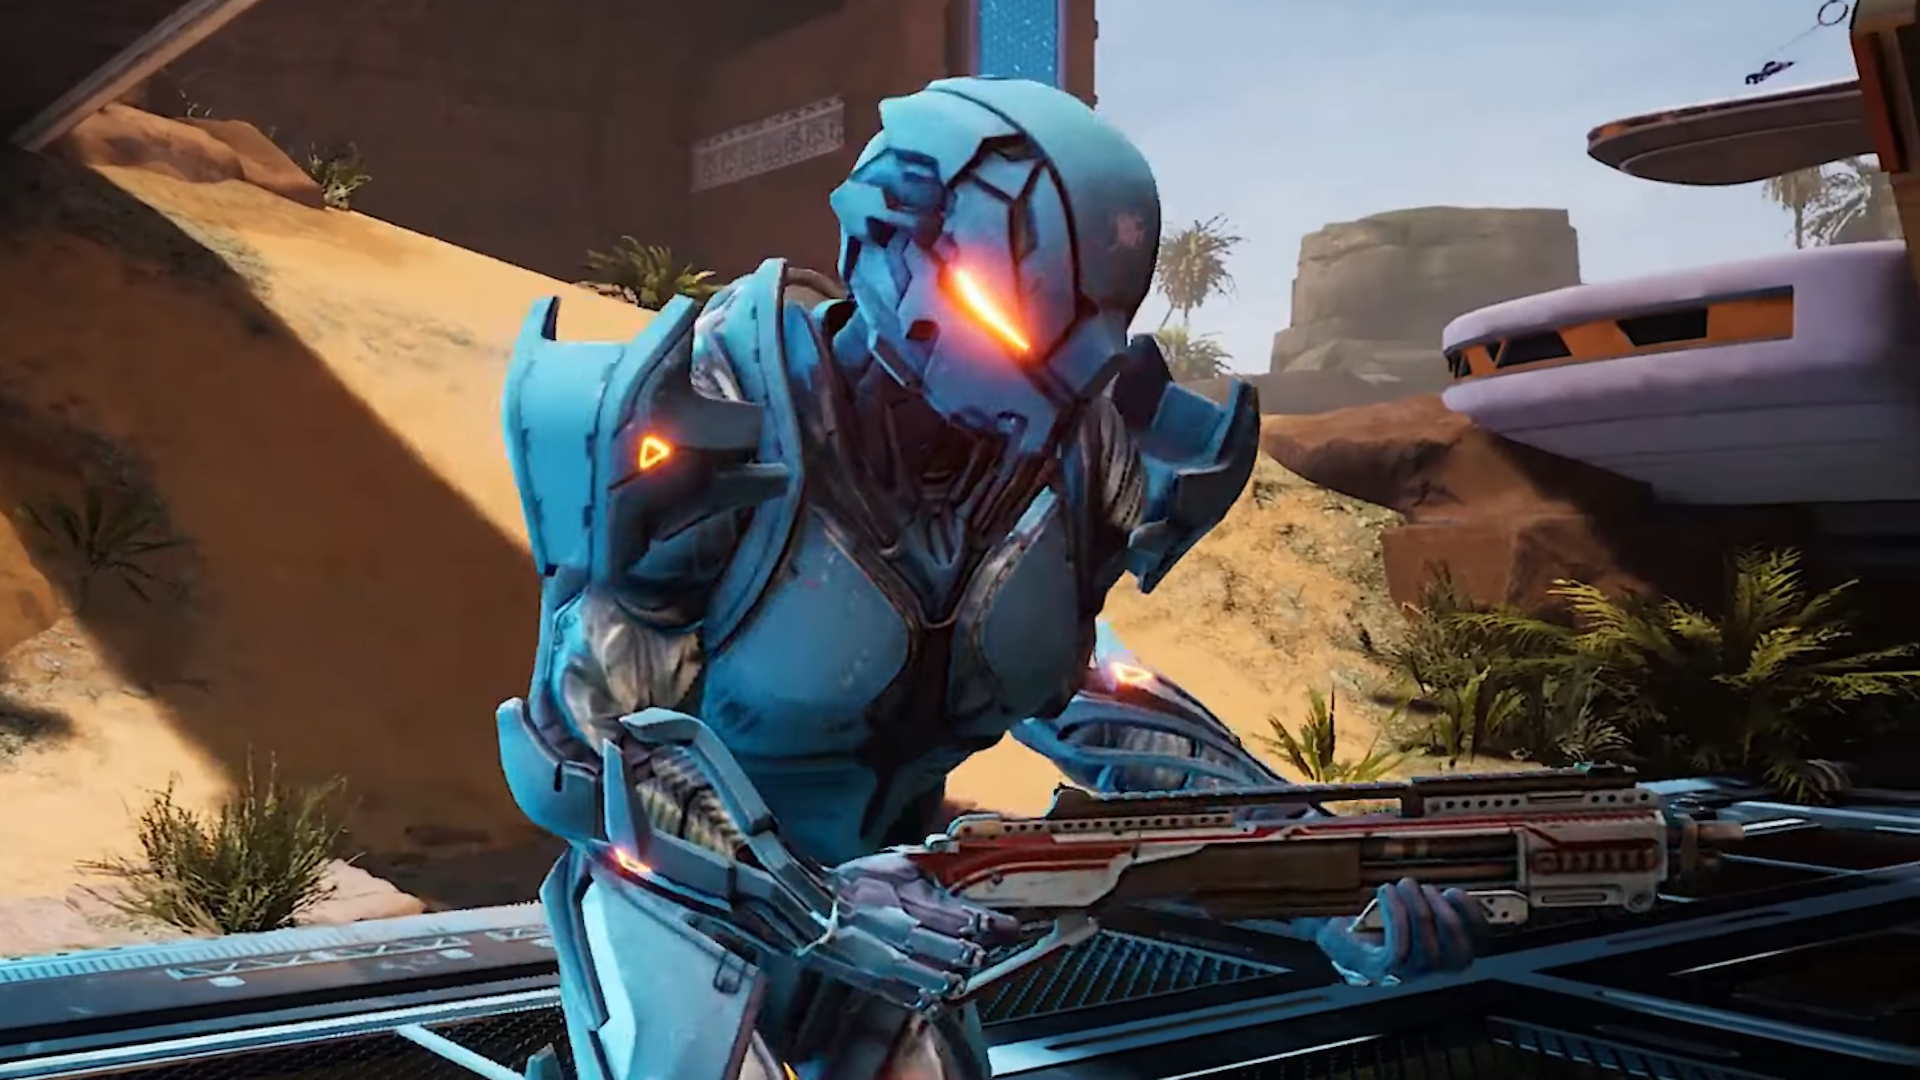 The Splitgate crossplay beta is so popular the developers had to take it offline